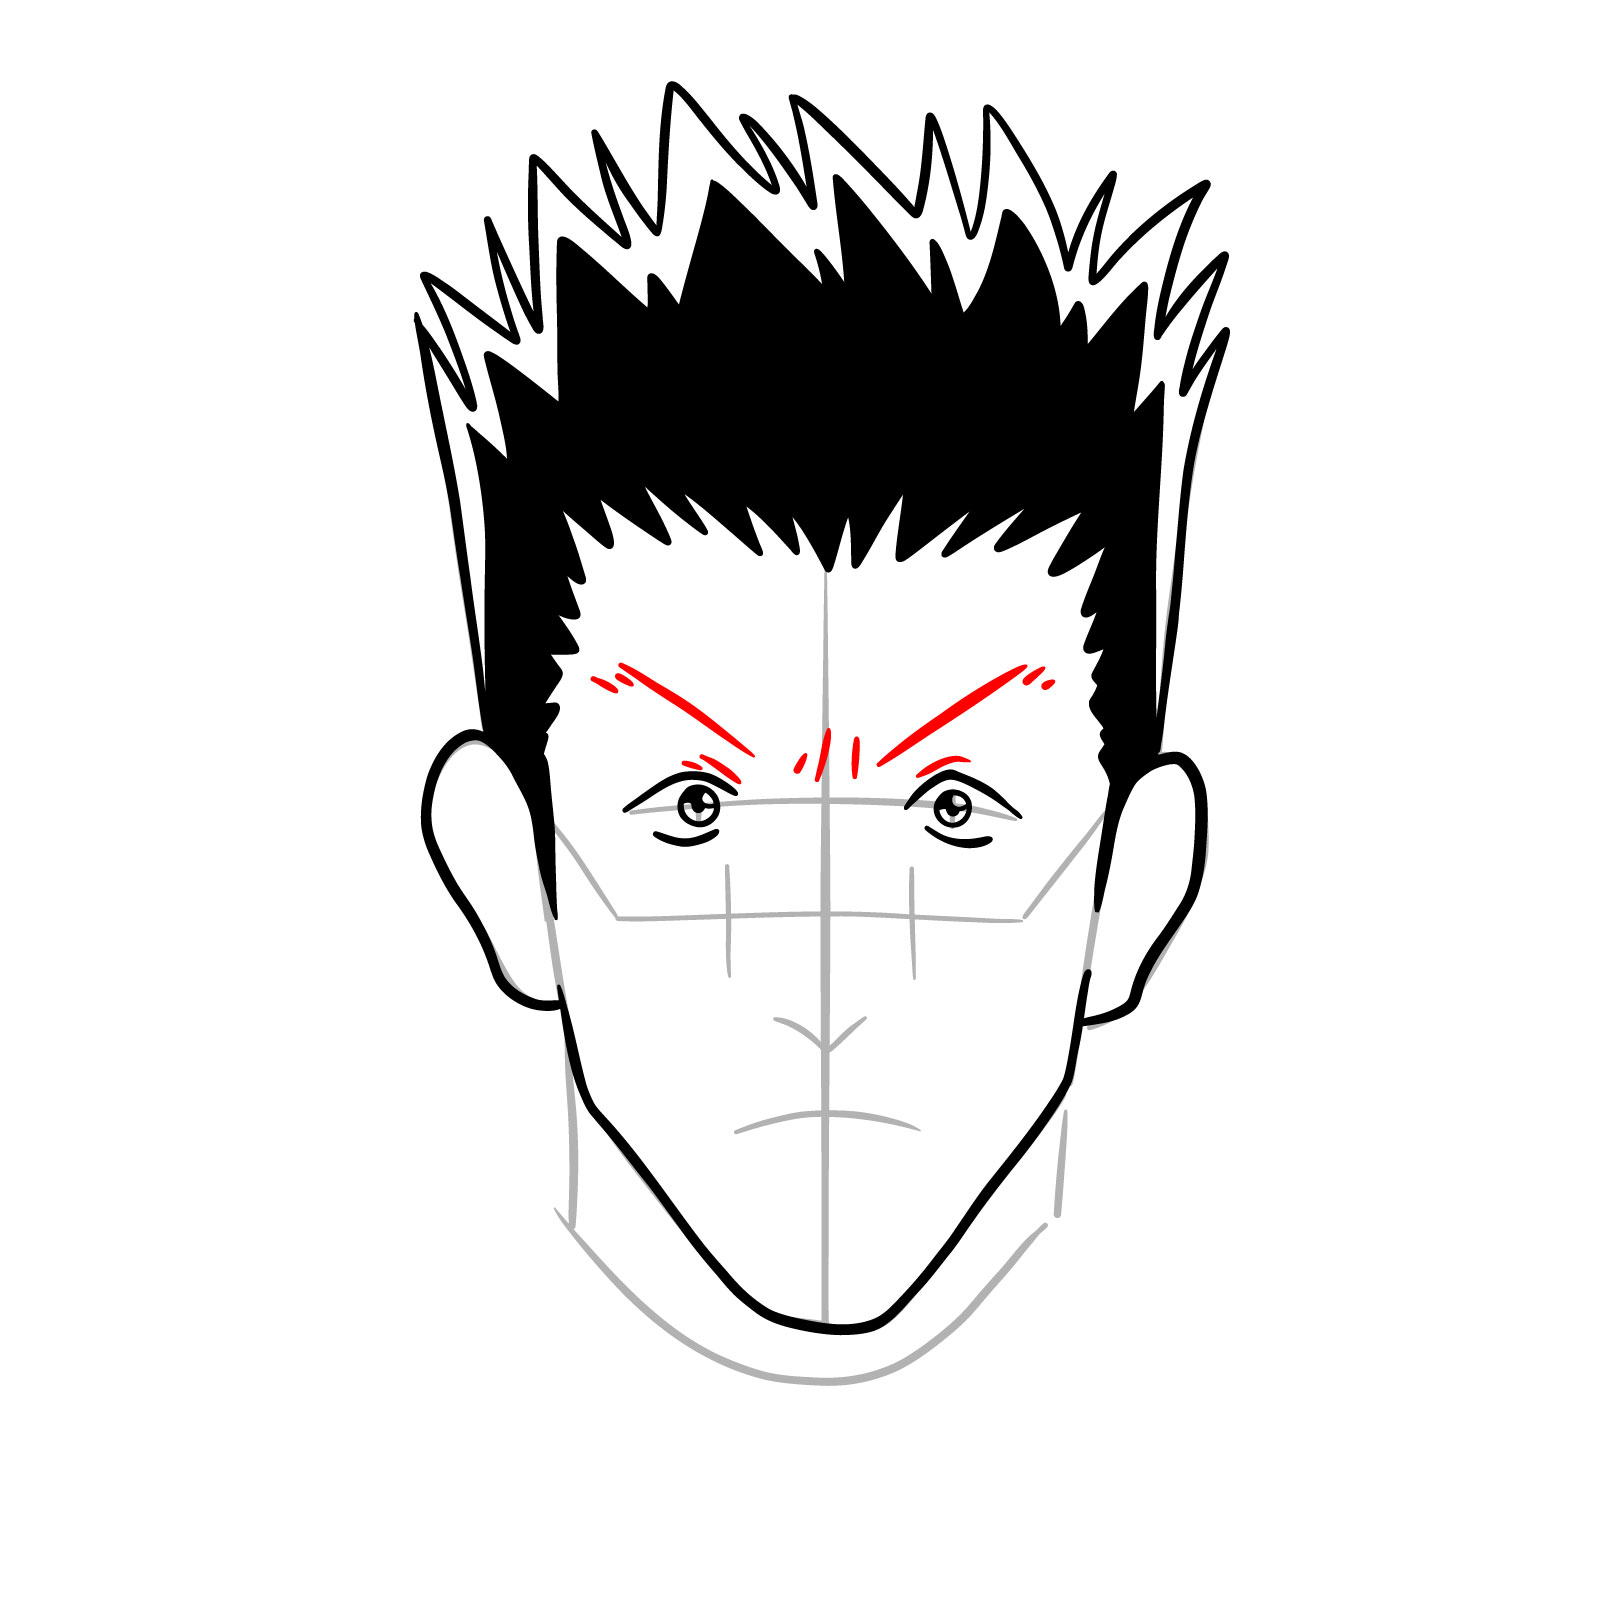 How to draw Leorio's face - Hunter x Hunter - step 12